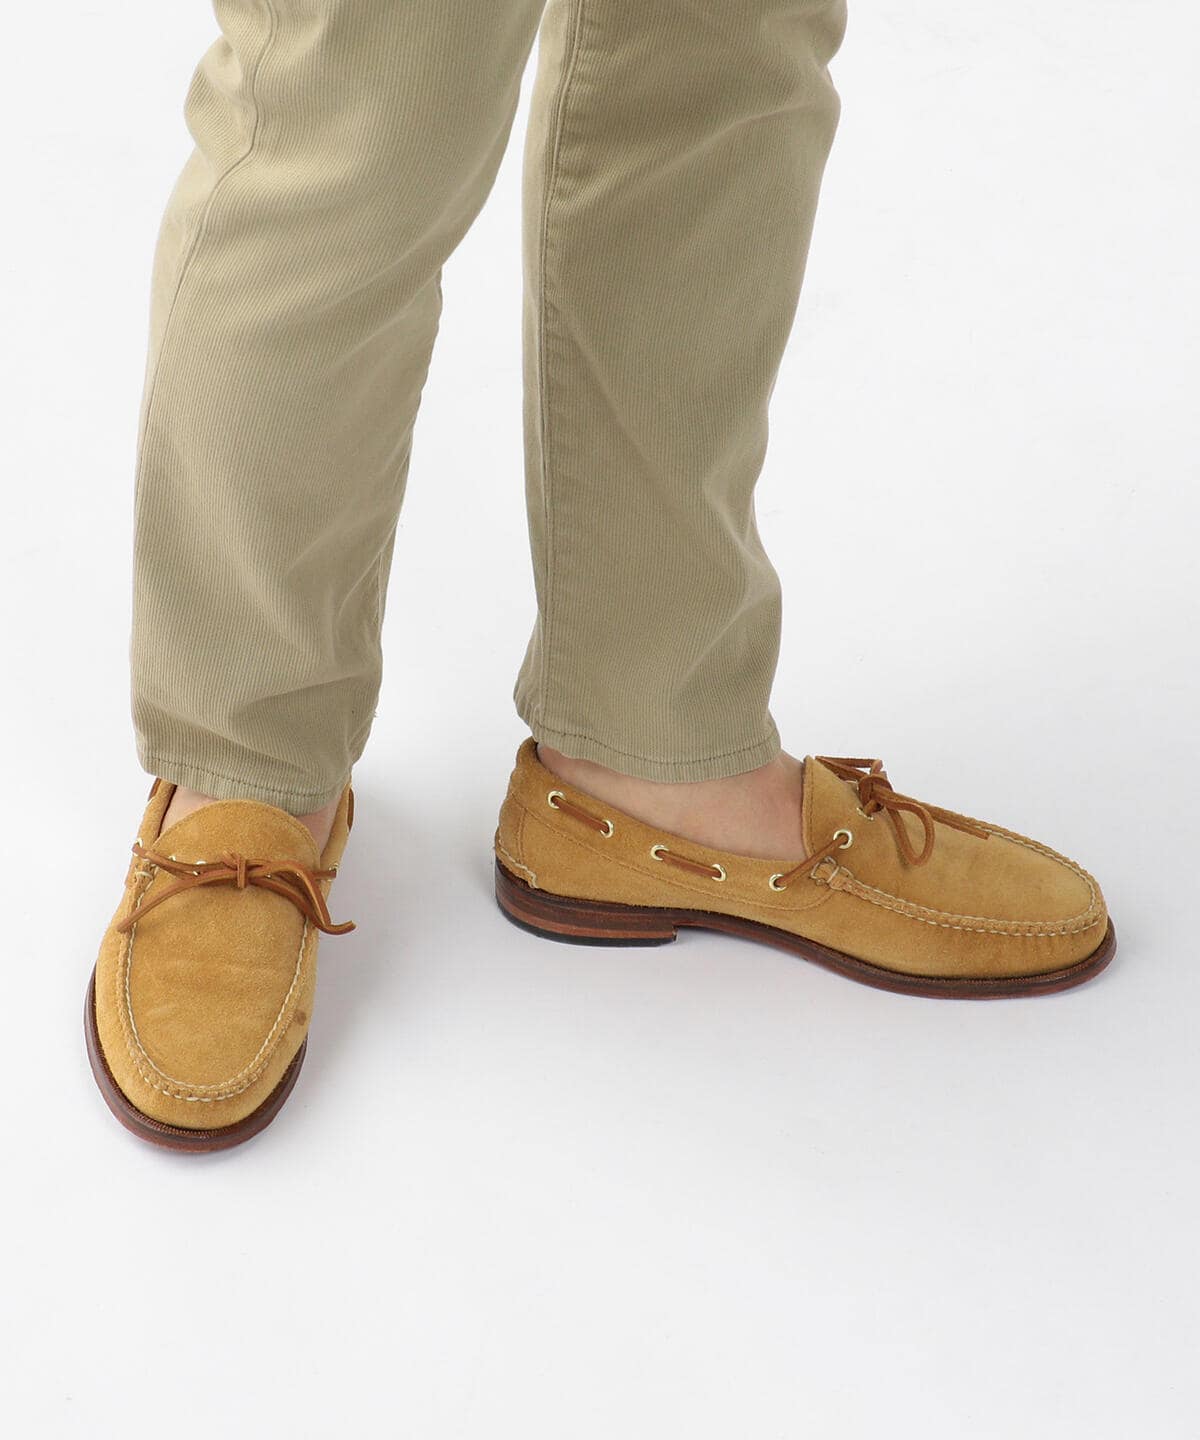 BEAMS PLUS RANCOURT & BEAMS PLUS / Special order Boothbay Loafer 